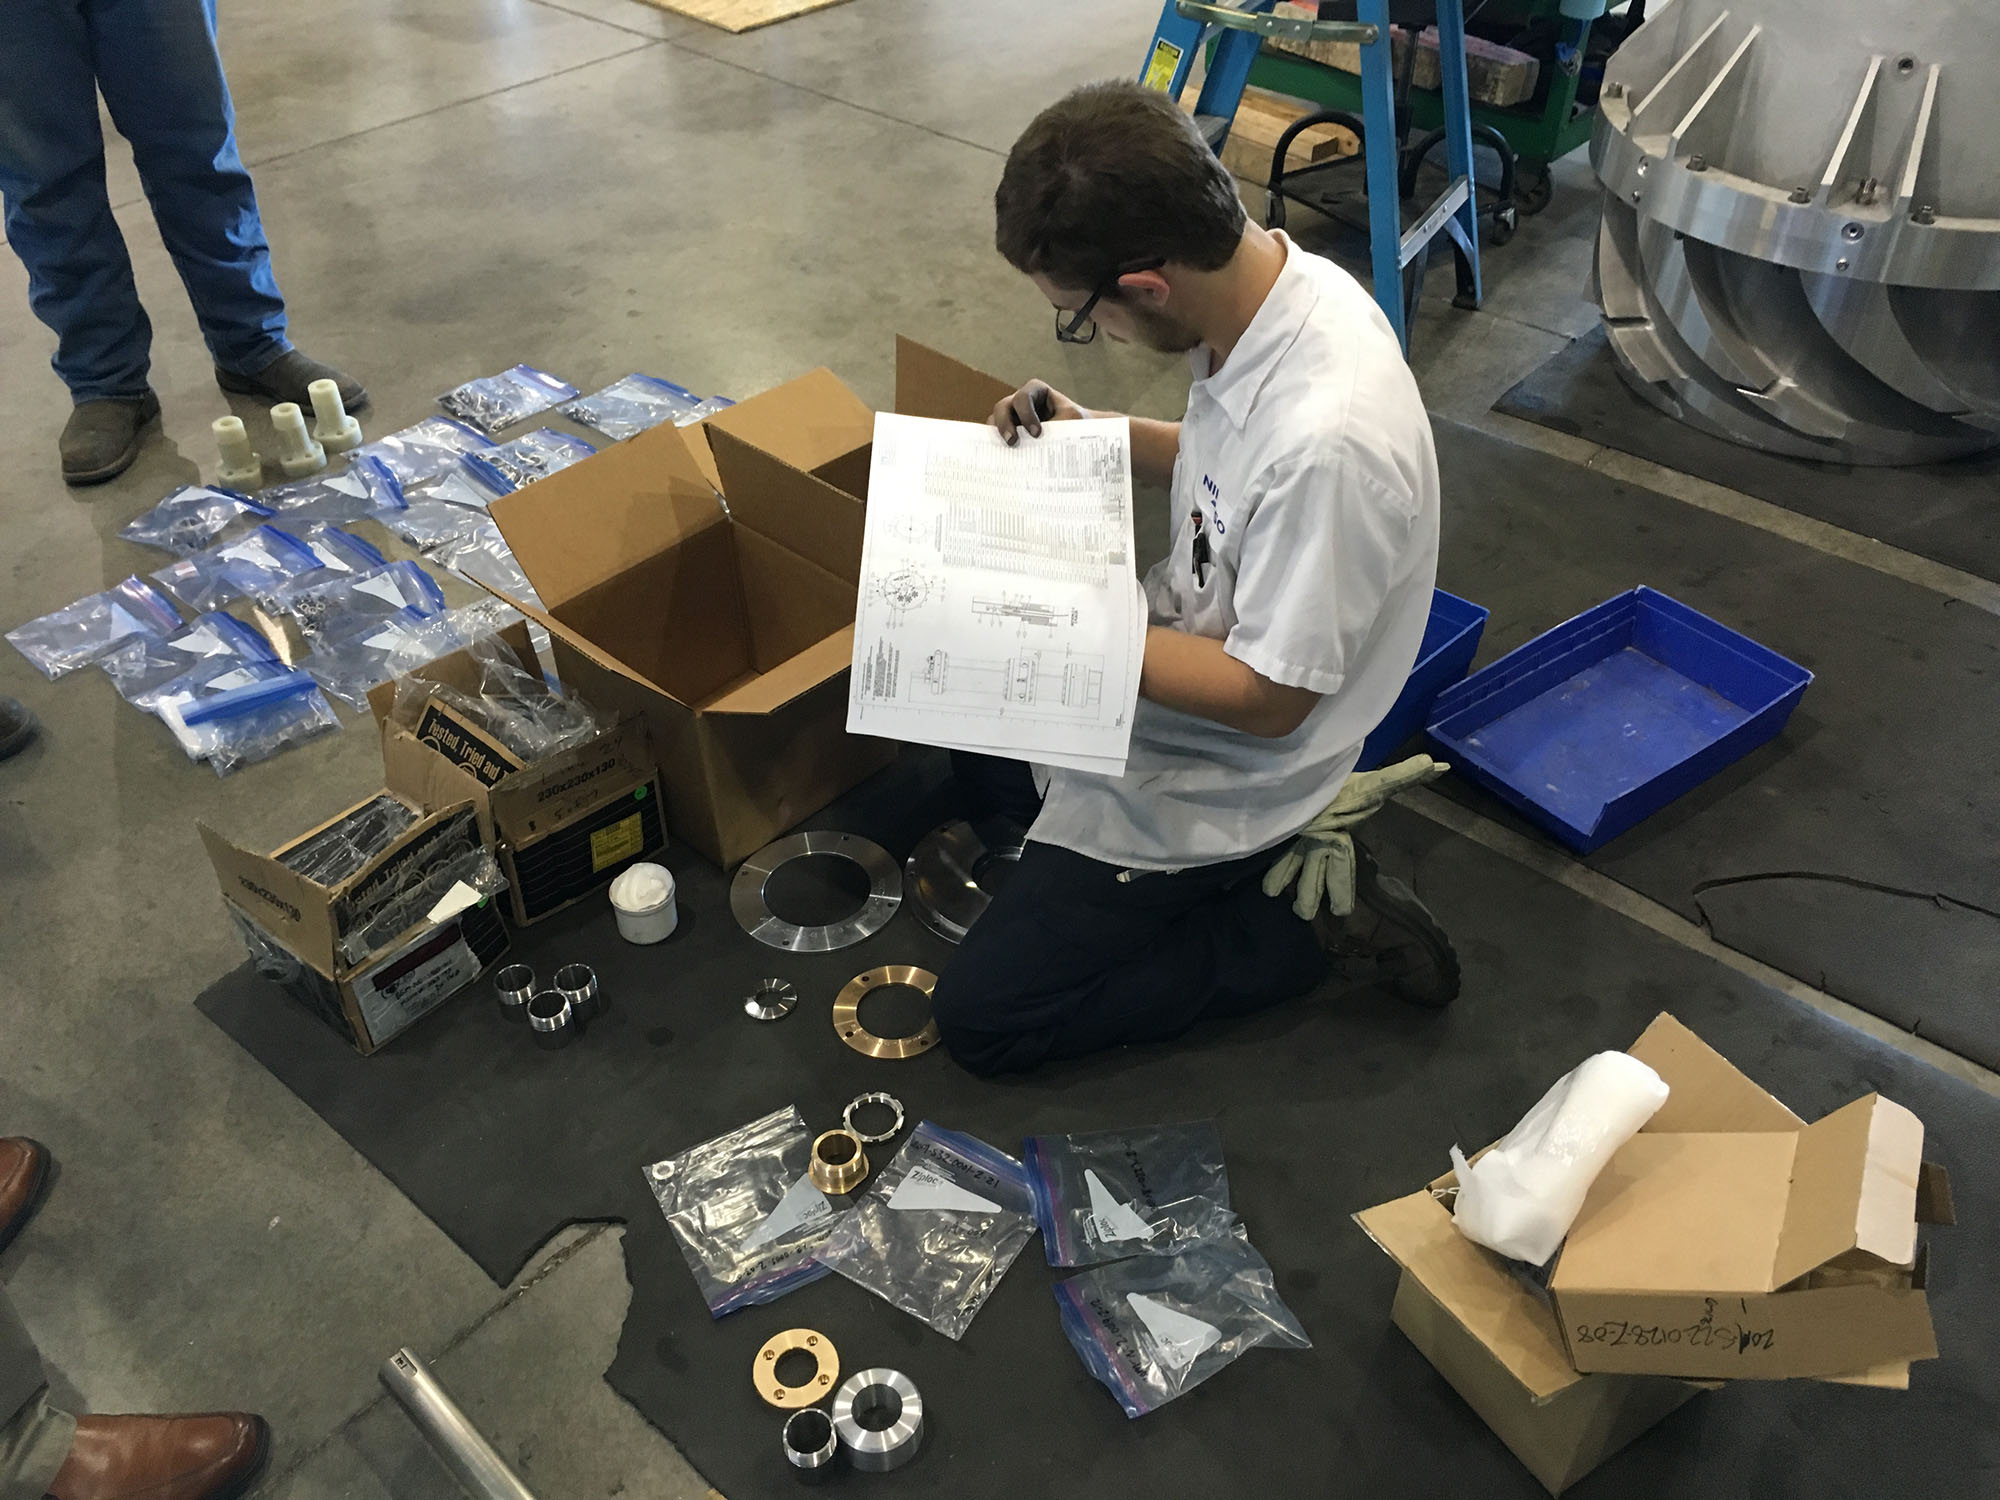 Kitting Parts to Assemble In-Tank Cryogenic Pump